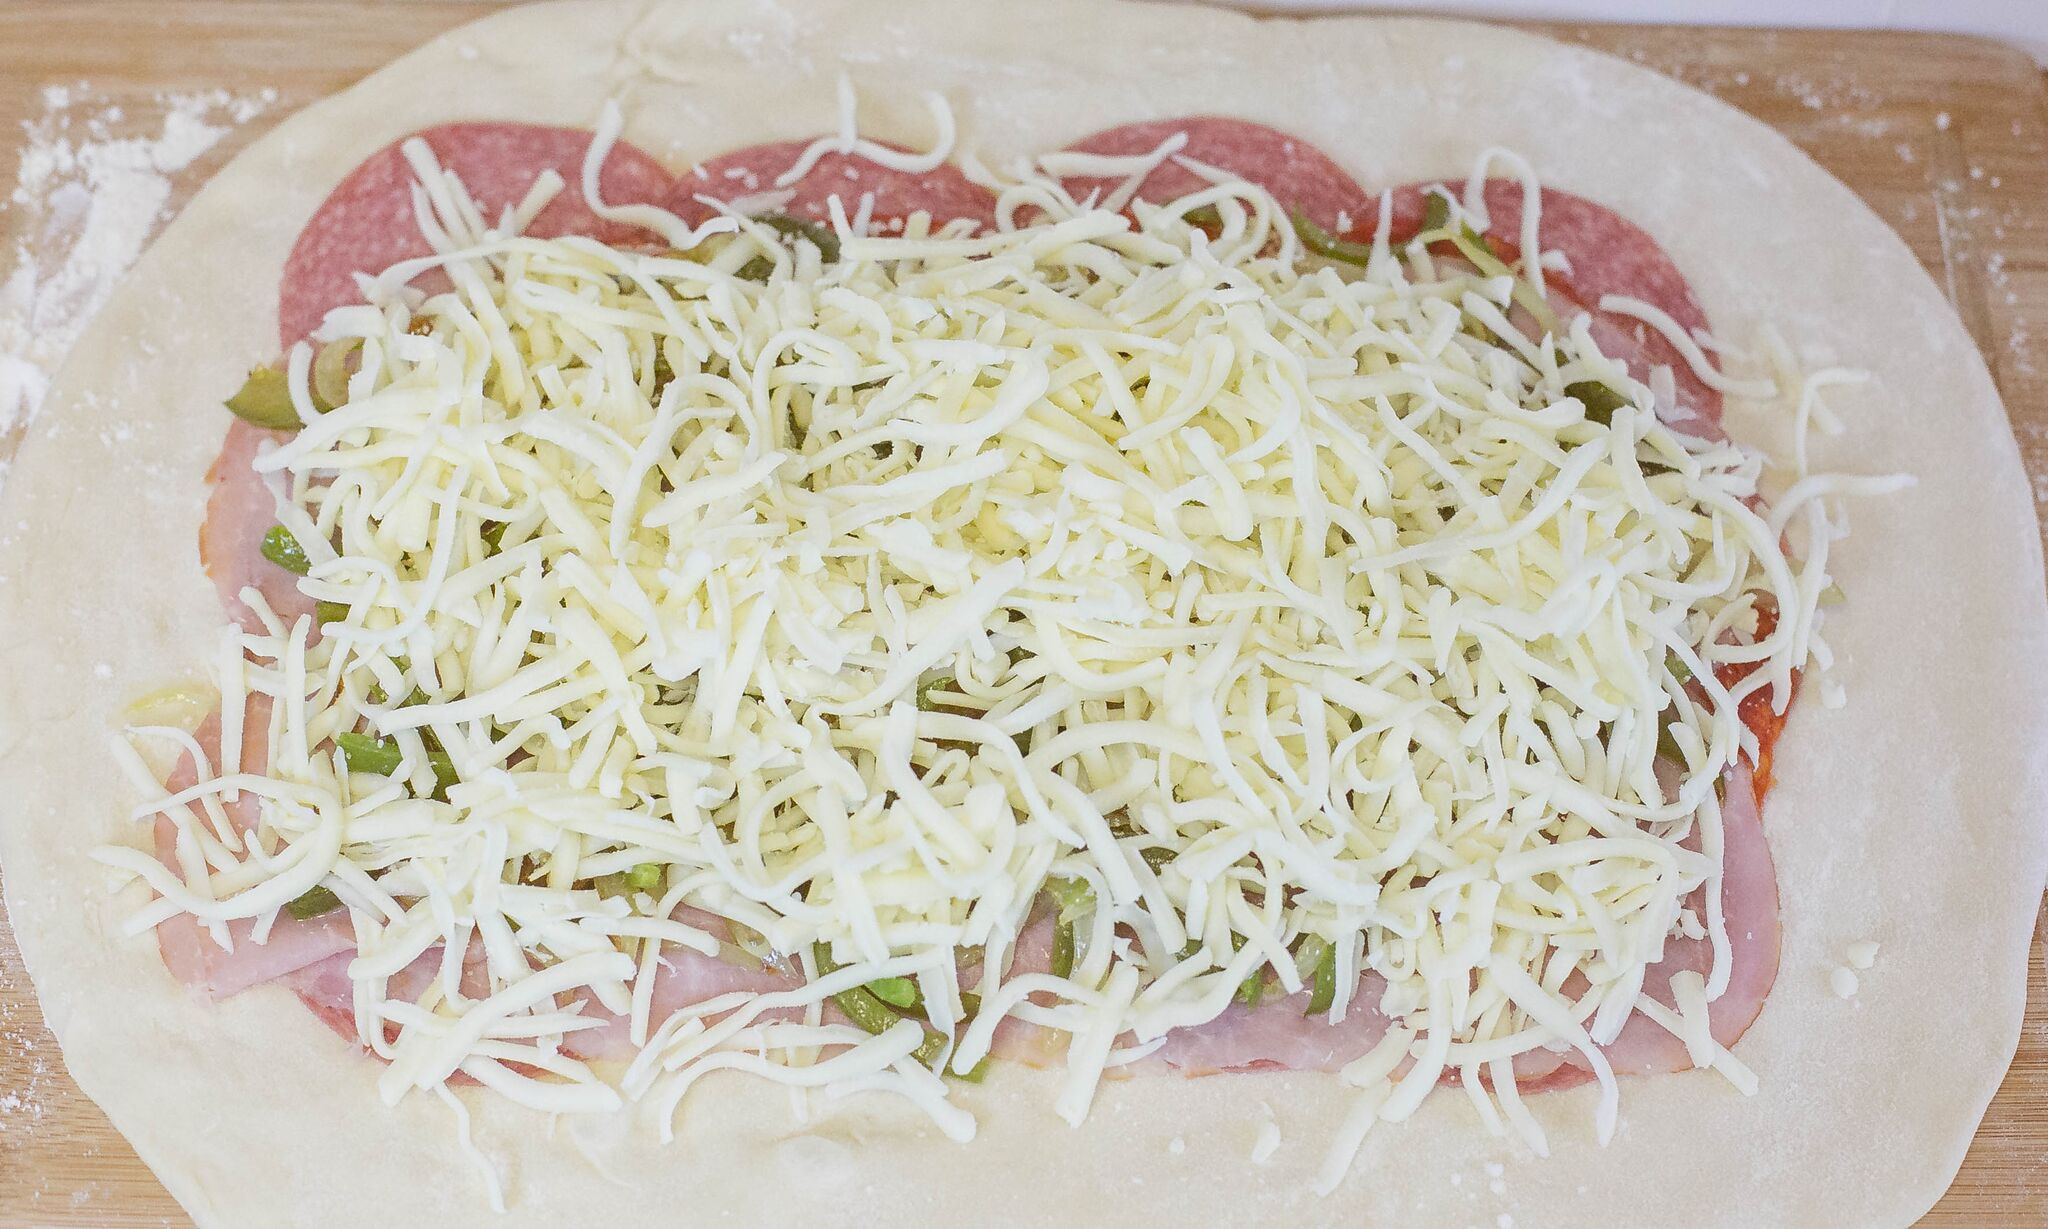 Layer salami, pepperoni, ham, onions, peppers, and cheese onto the dough. 